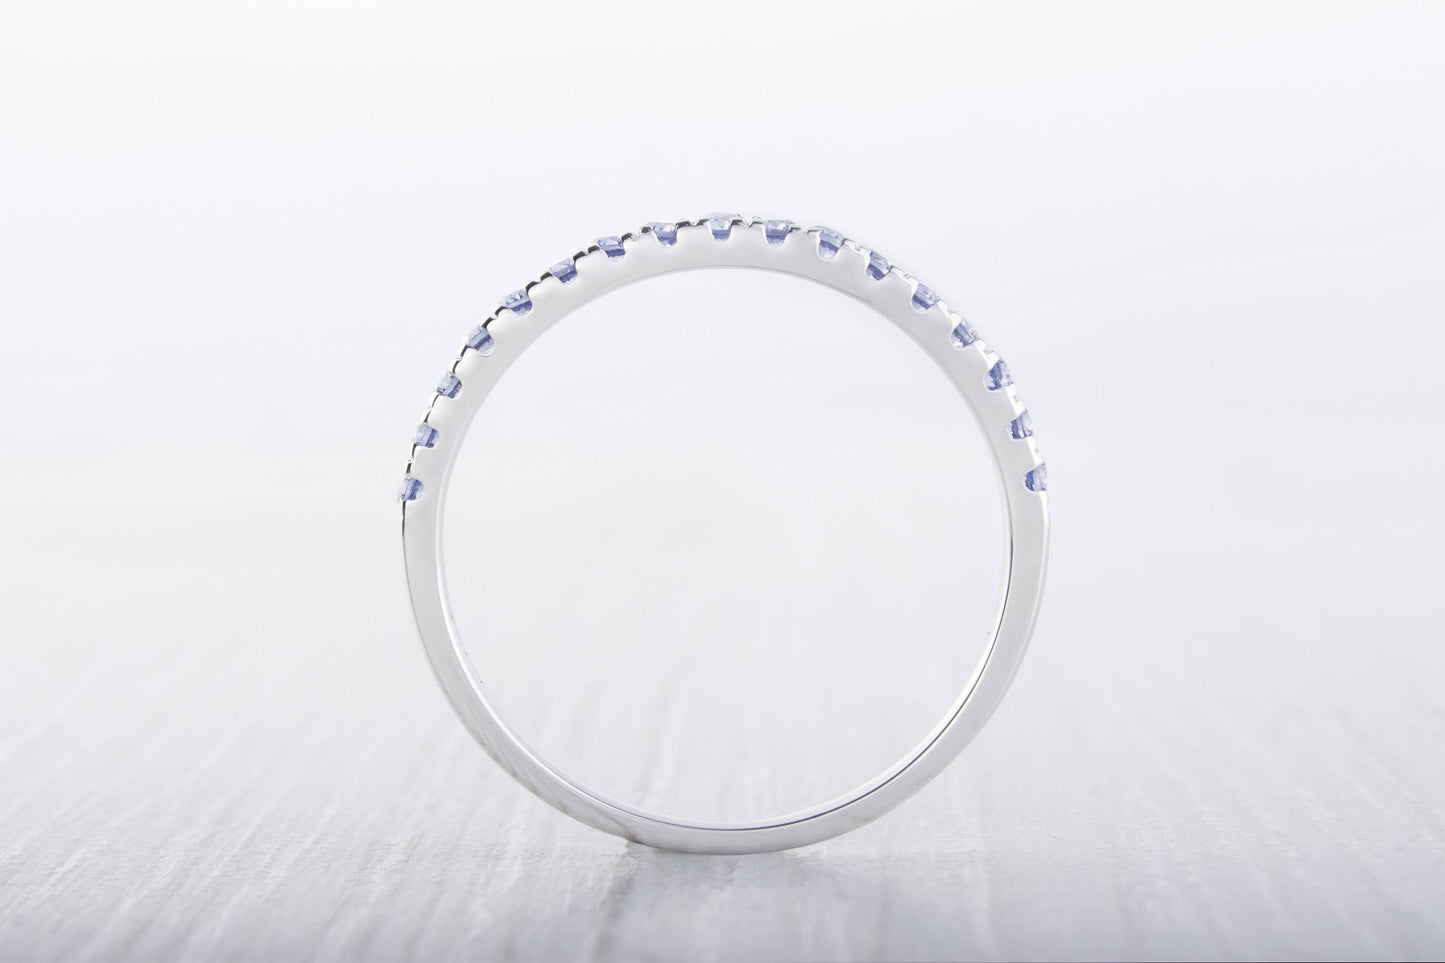 Natural Tanzanite 1.8mm wide Half Eternity ring  in white gold or Silver - stacking ring - wedding band - handmade engagement ring